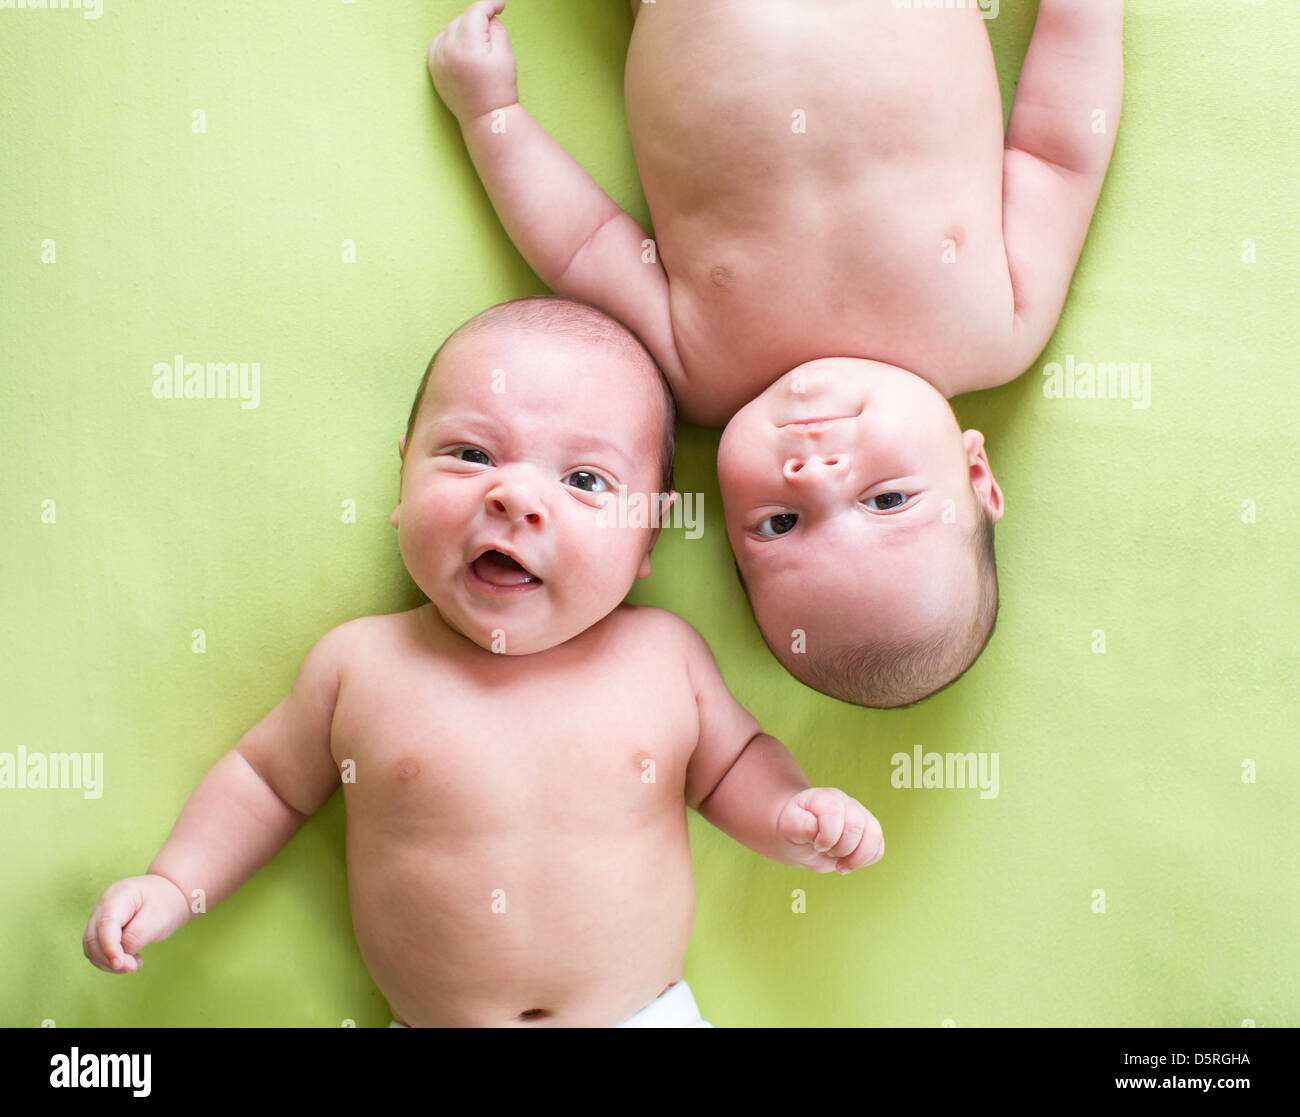 Adorable twin baby brothers. Top view of children. Stock Photo